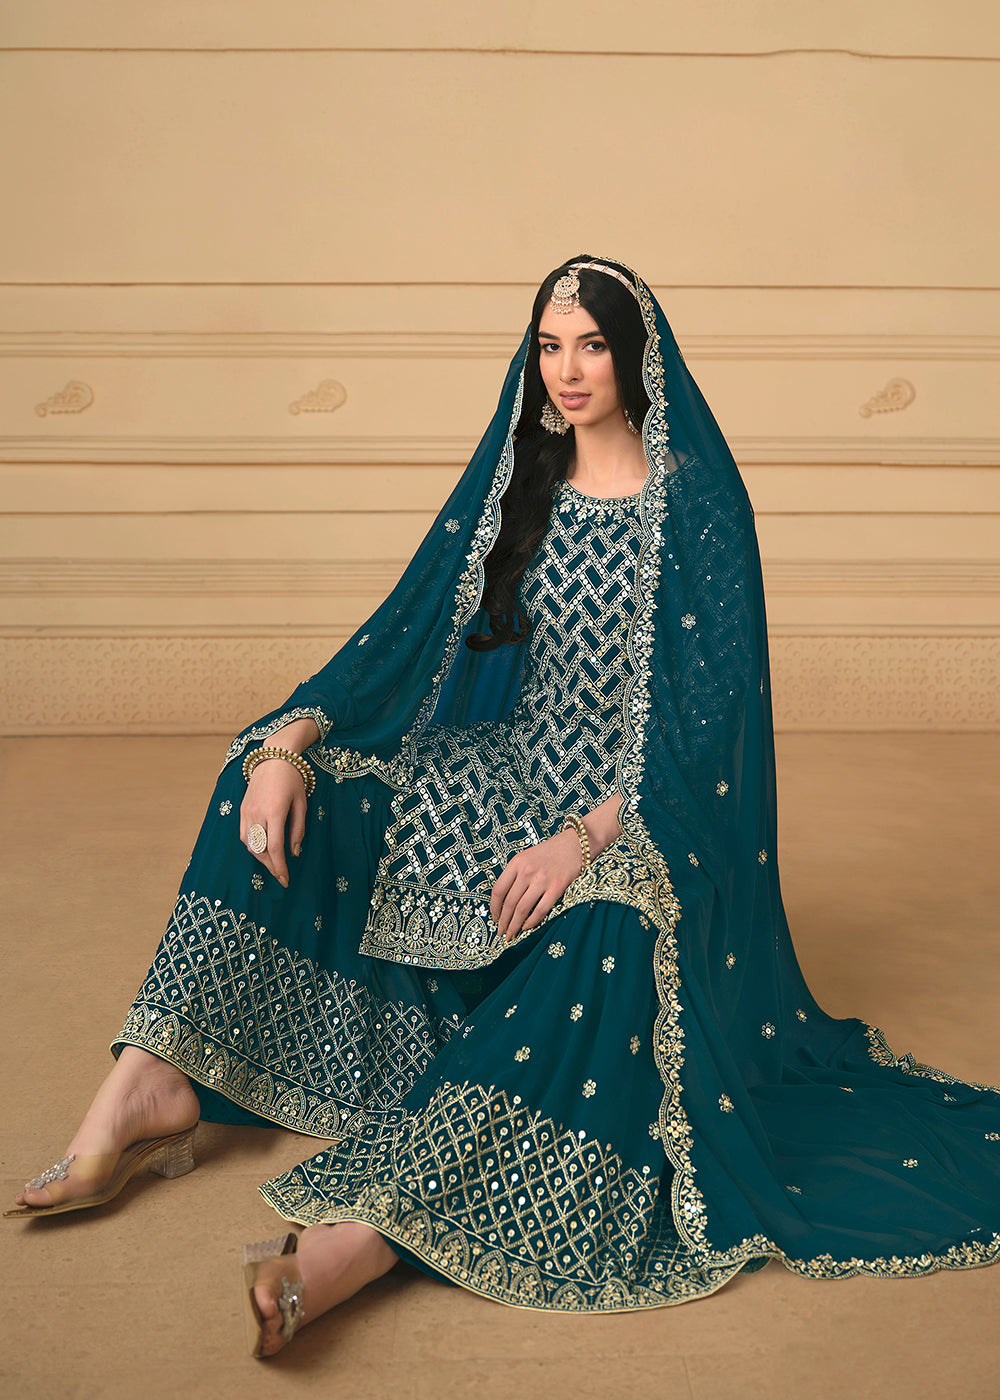 Shop Now Georgette Peacock Blue Embroidered Gharara Style Suit Online at Empress Clothing in USA, UK, Canada, Italy & Worldwide.